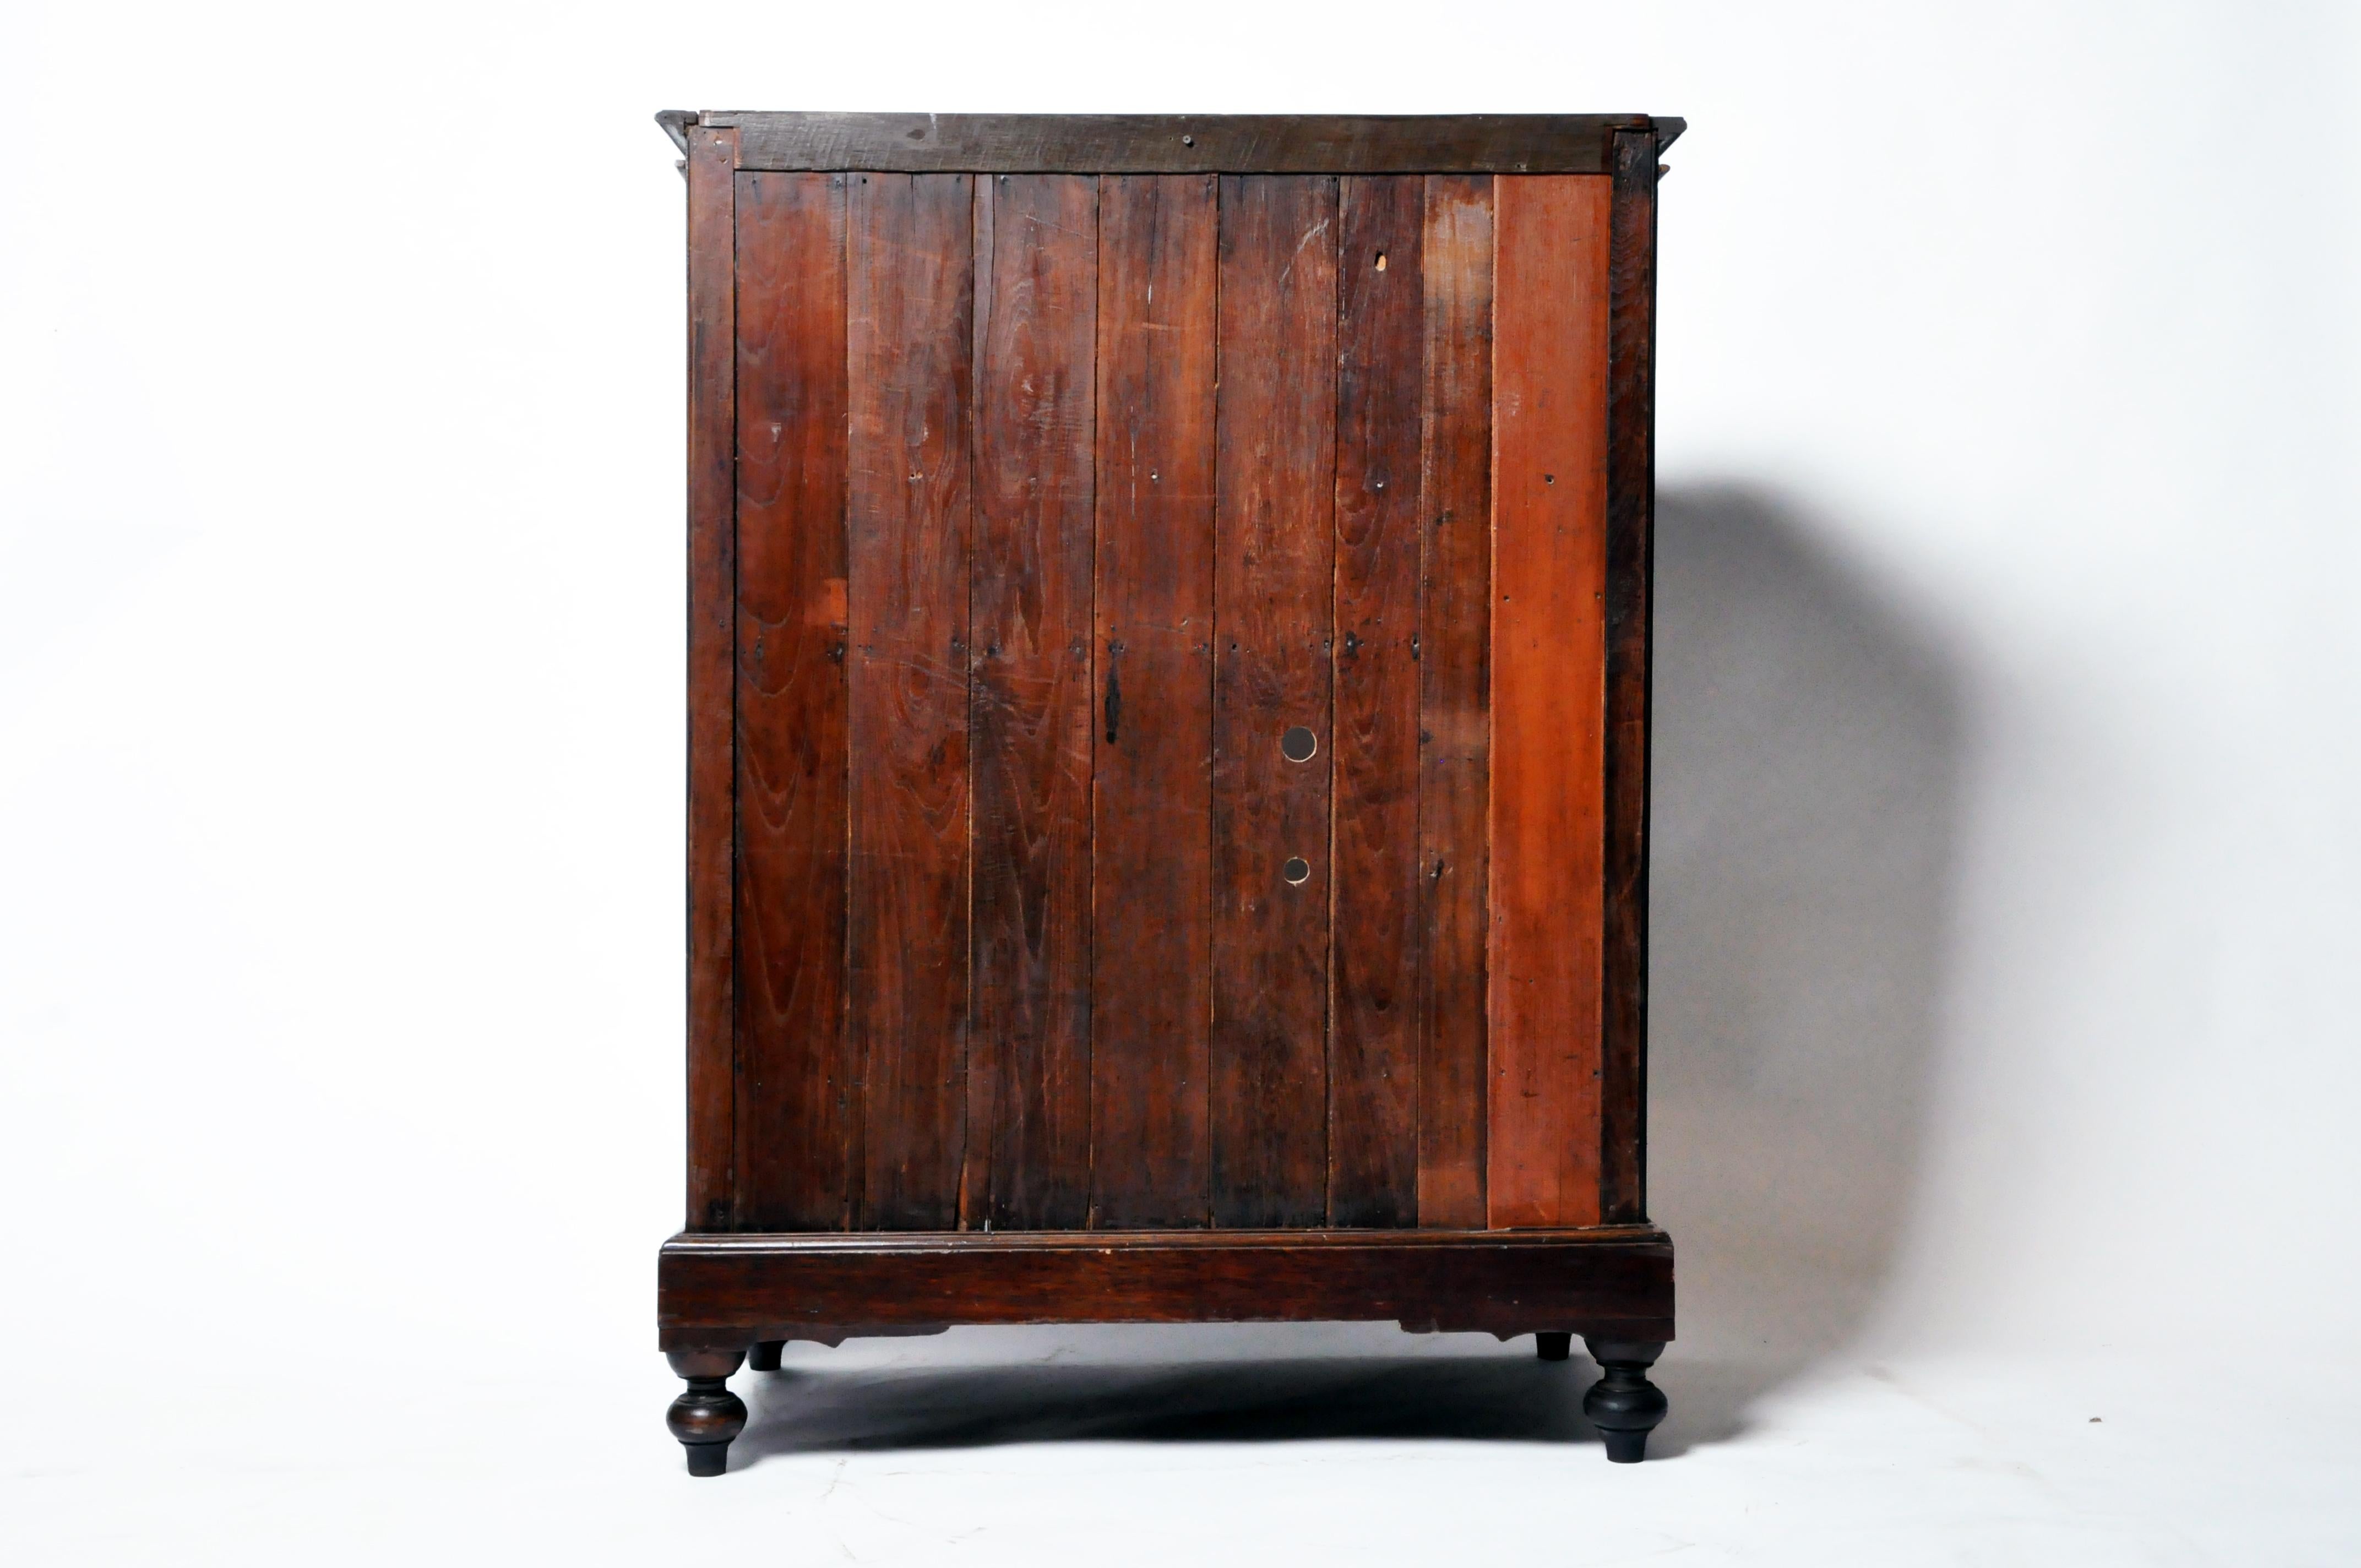 This British Colonial cabinet is from Burma and was made from teak wood in c. 20th century. The handsome piece features a pair of doors and two drawers for storage. The inside of the piece has a shelf for additional storage and more shelves can be